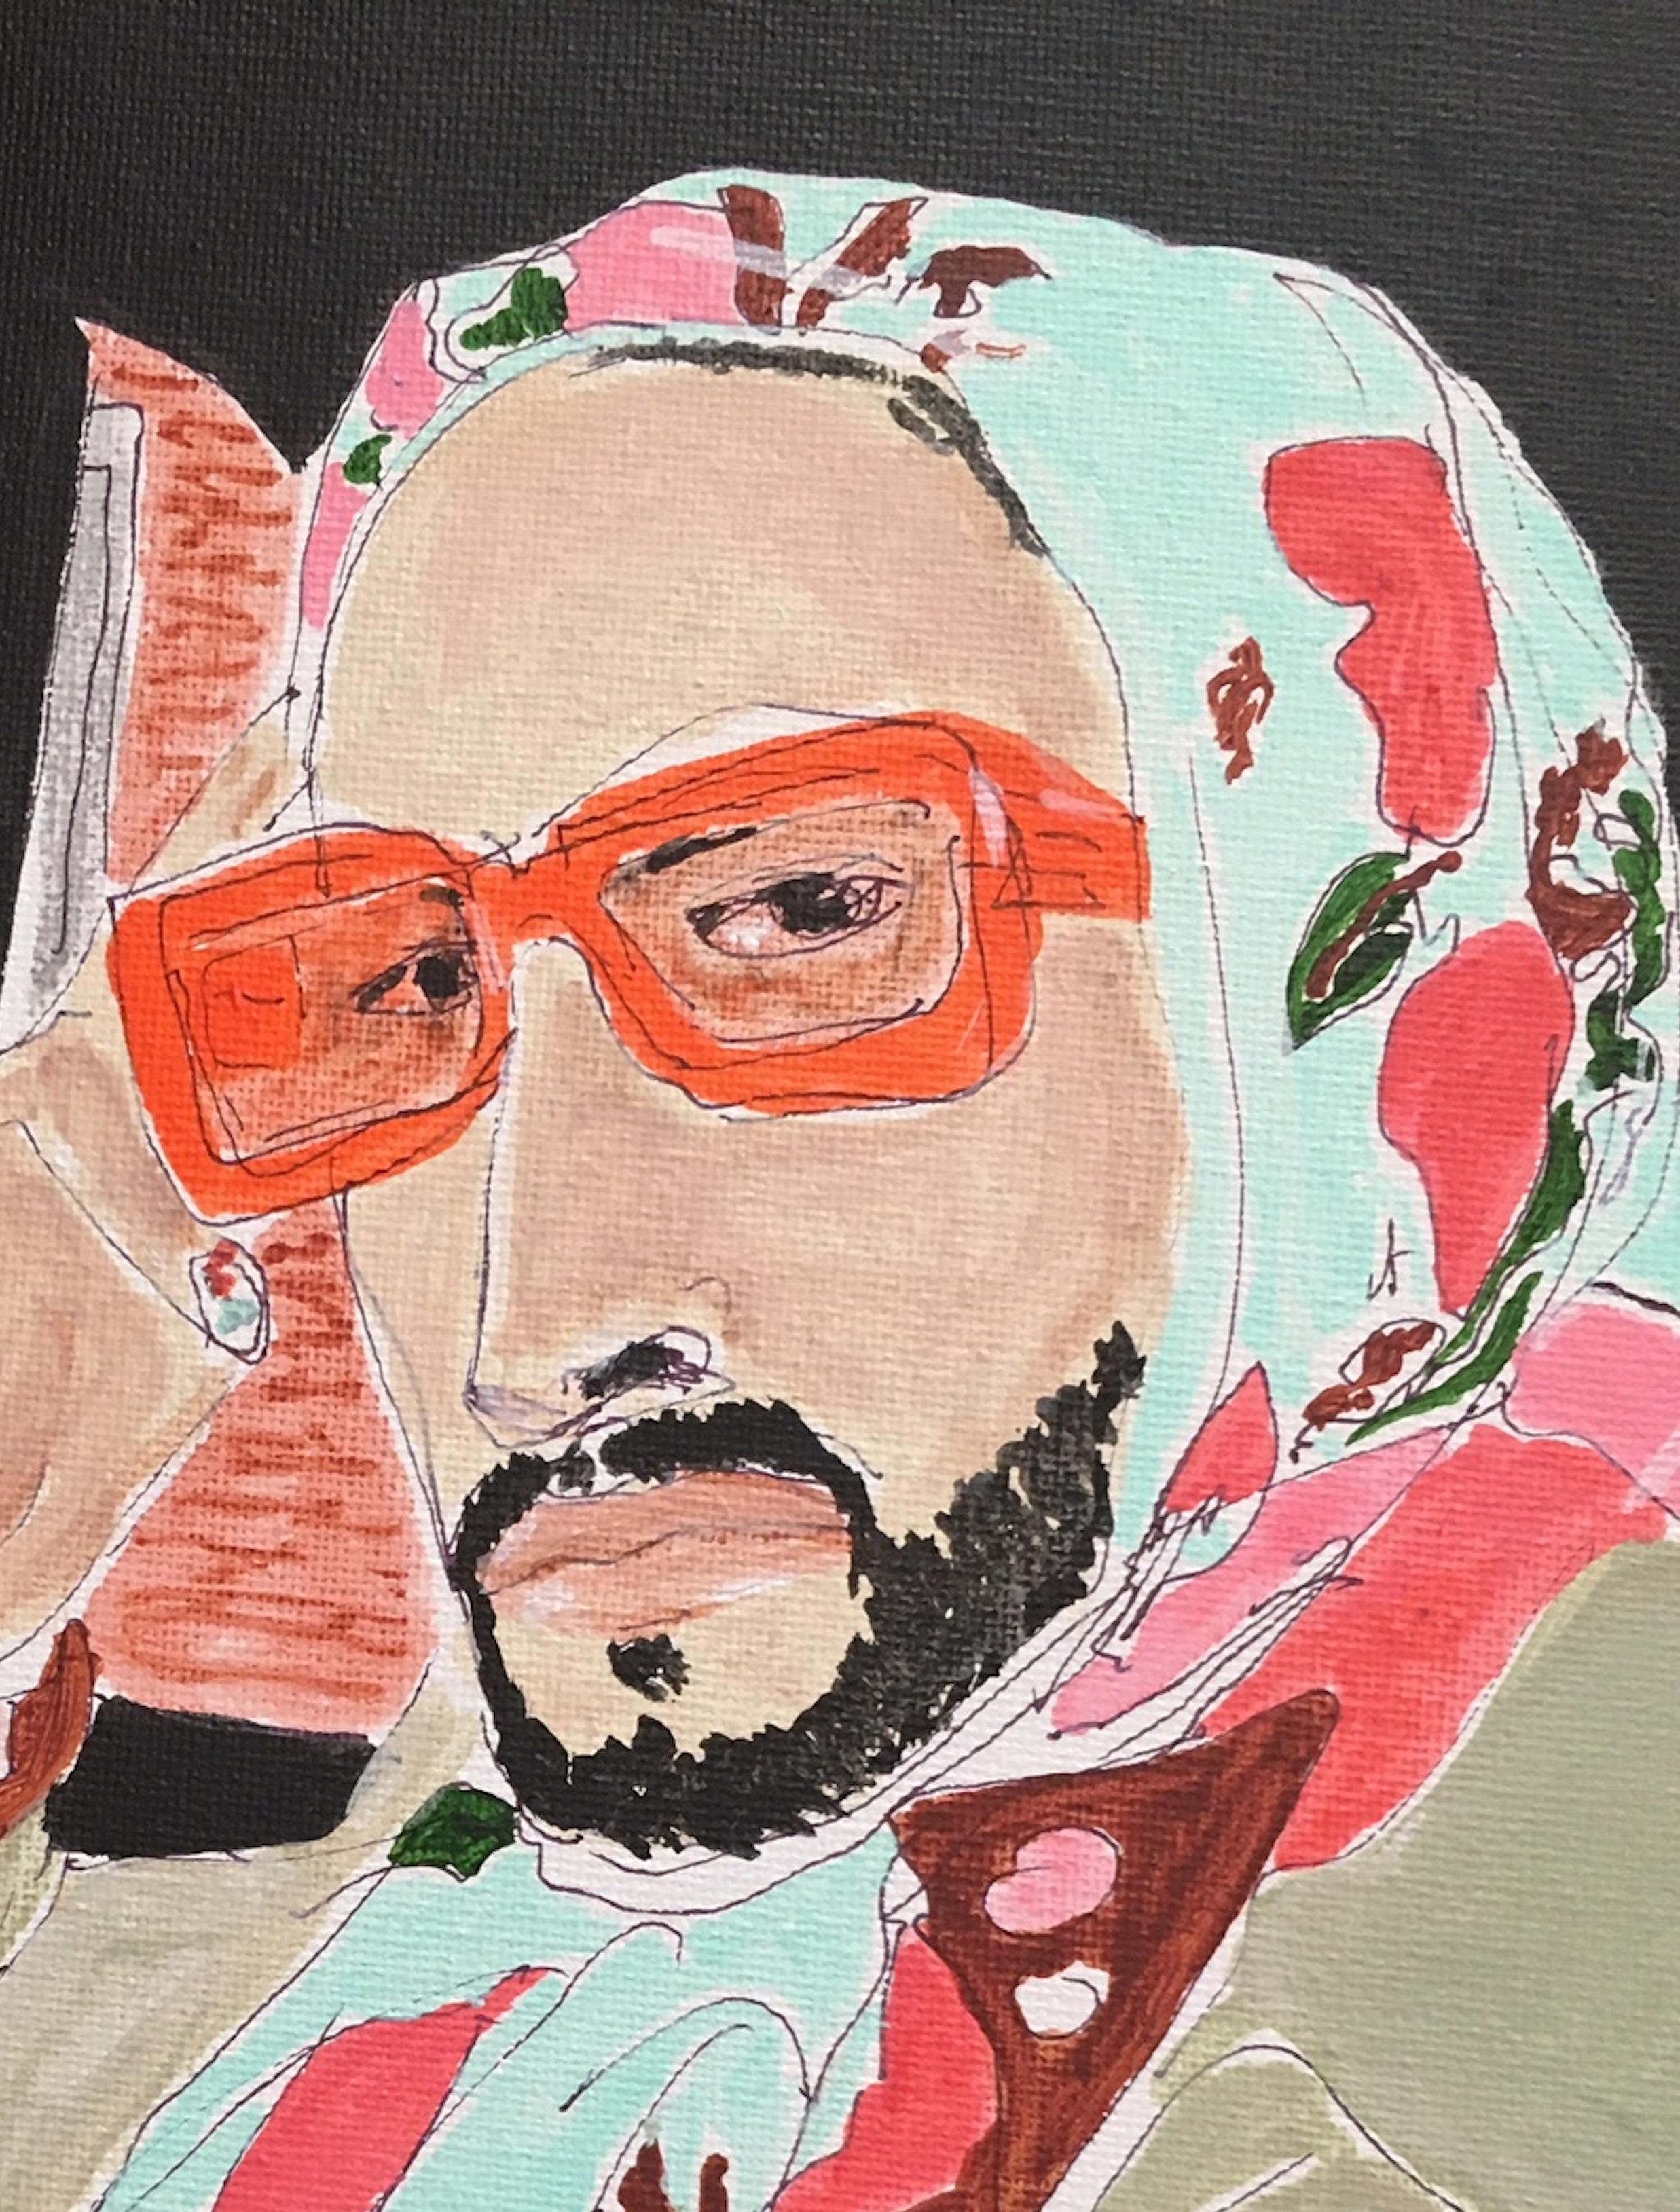 Fashion designer Marc Jacobs, Pink Portrait.  Acrylic on canvas  - Painting by Manuel Santelices